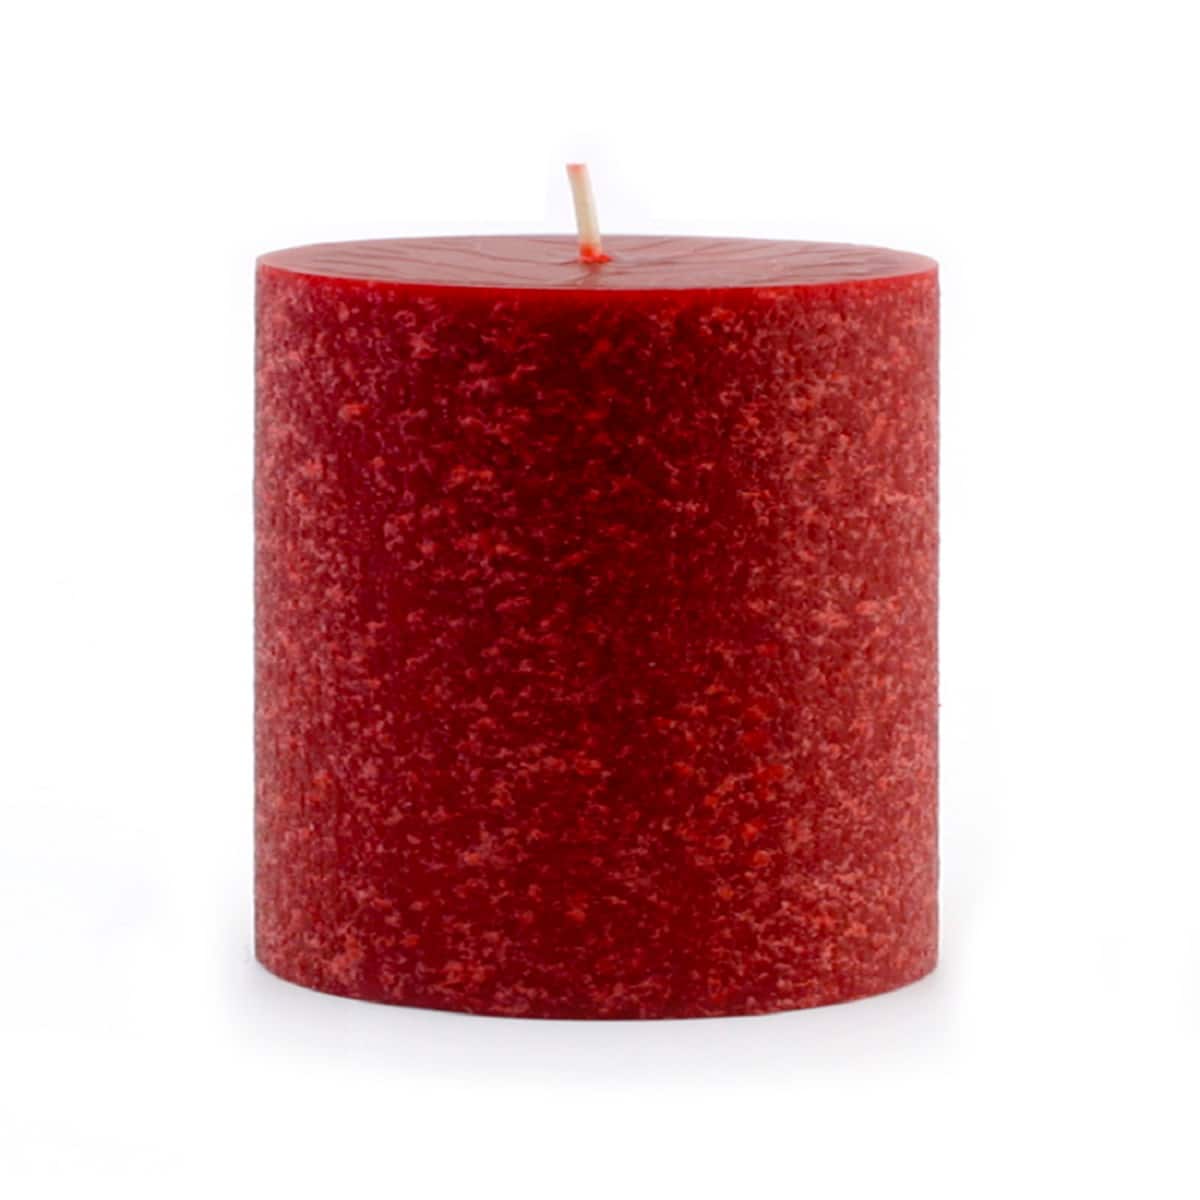 Buttercream Root Candles Unscented Timberline Pillar Candle 3 x 6-Inches